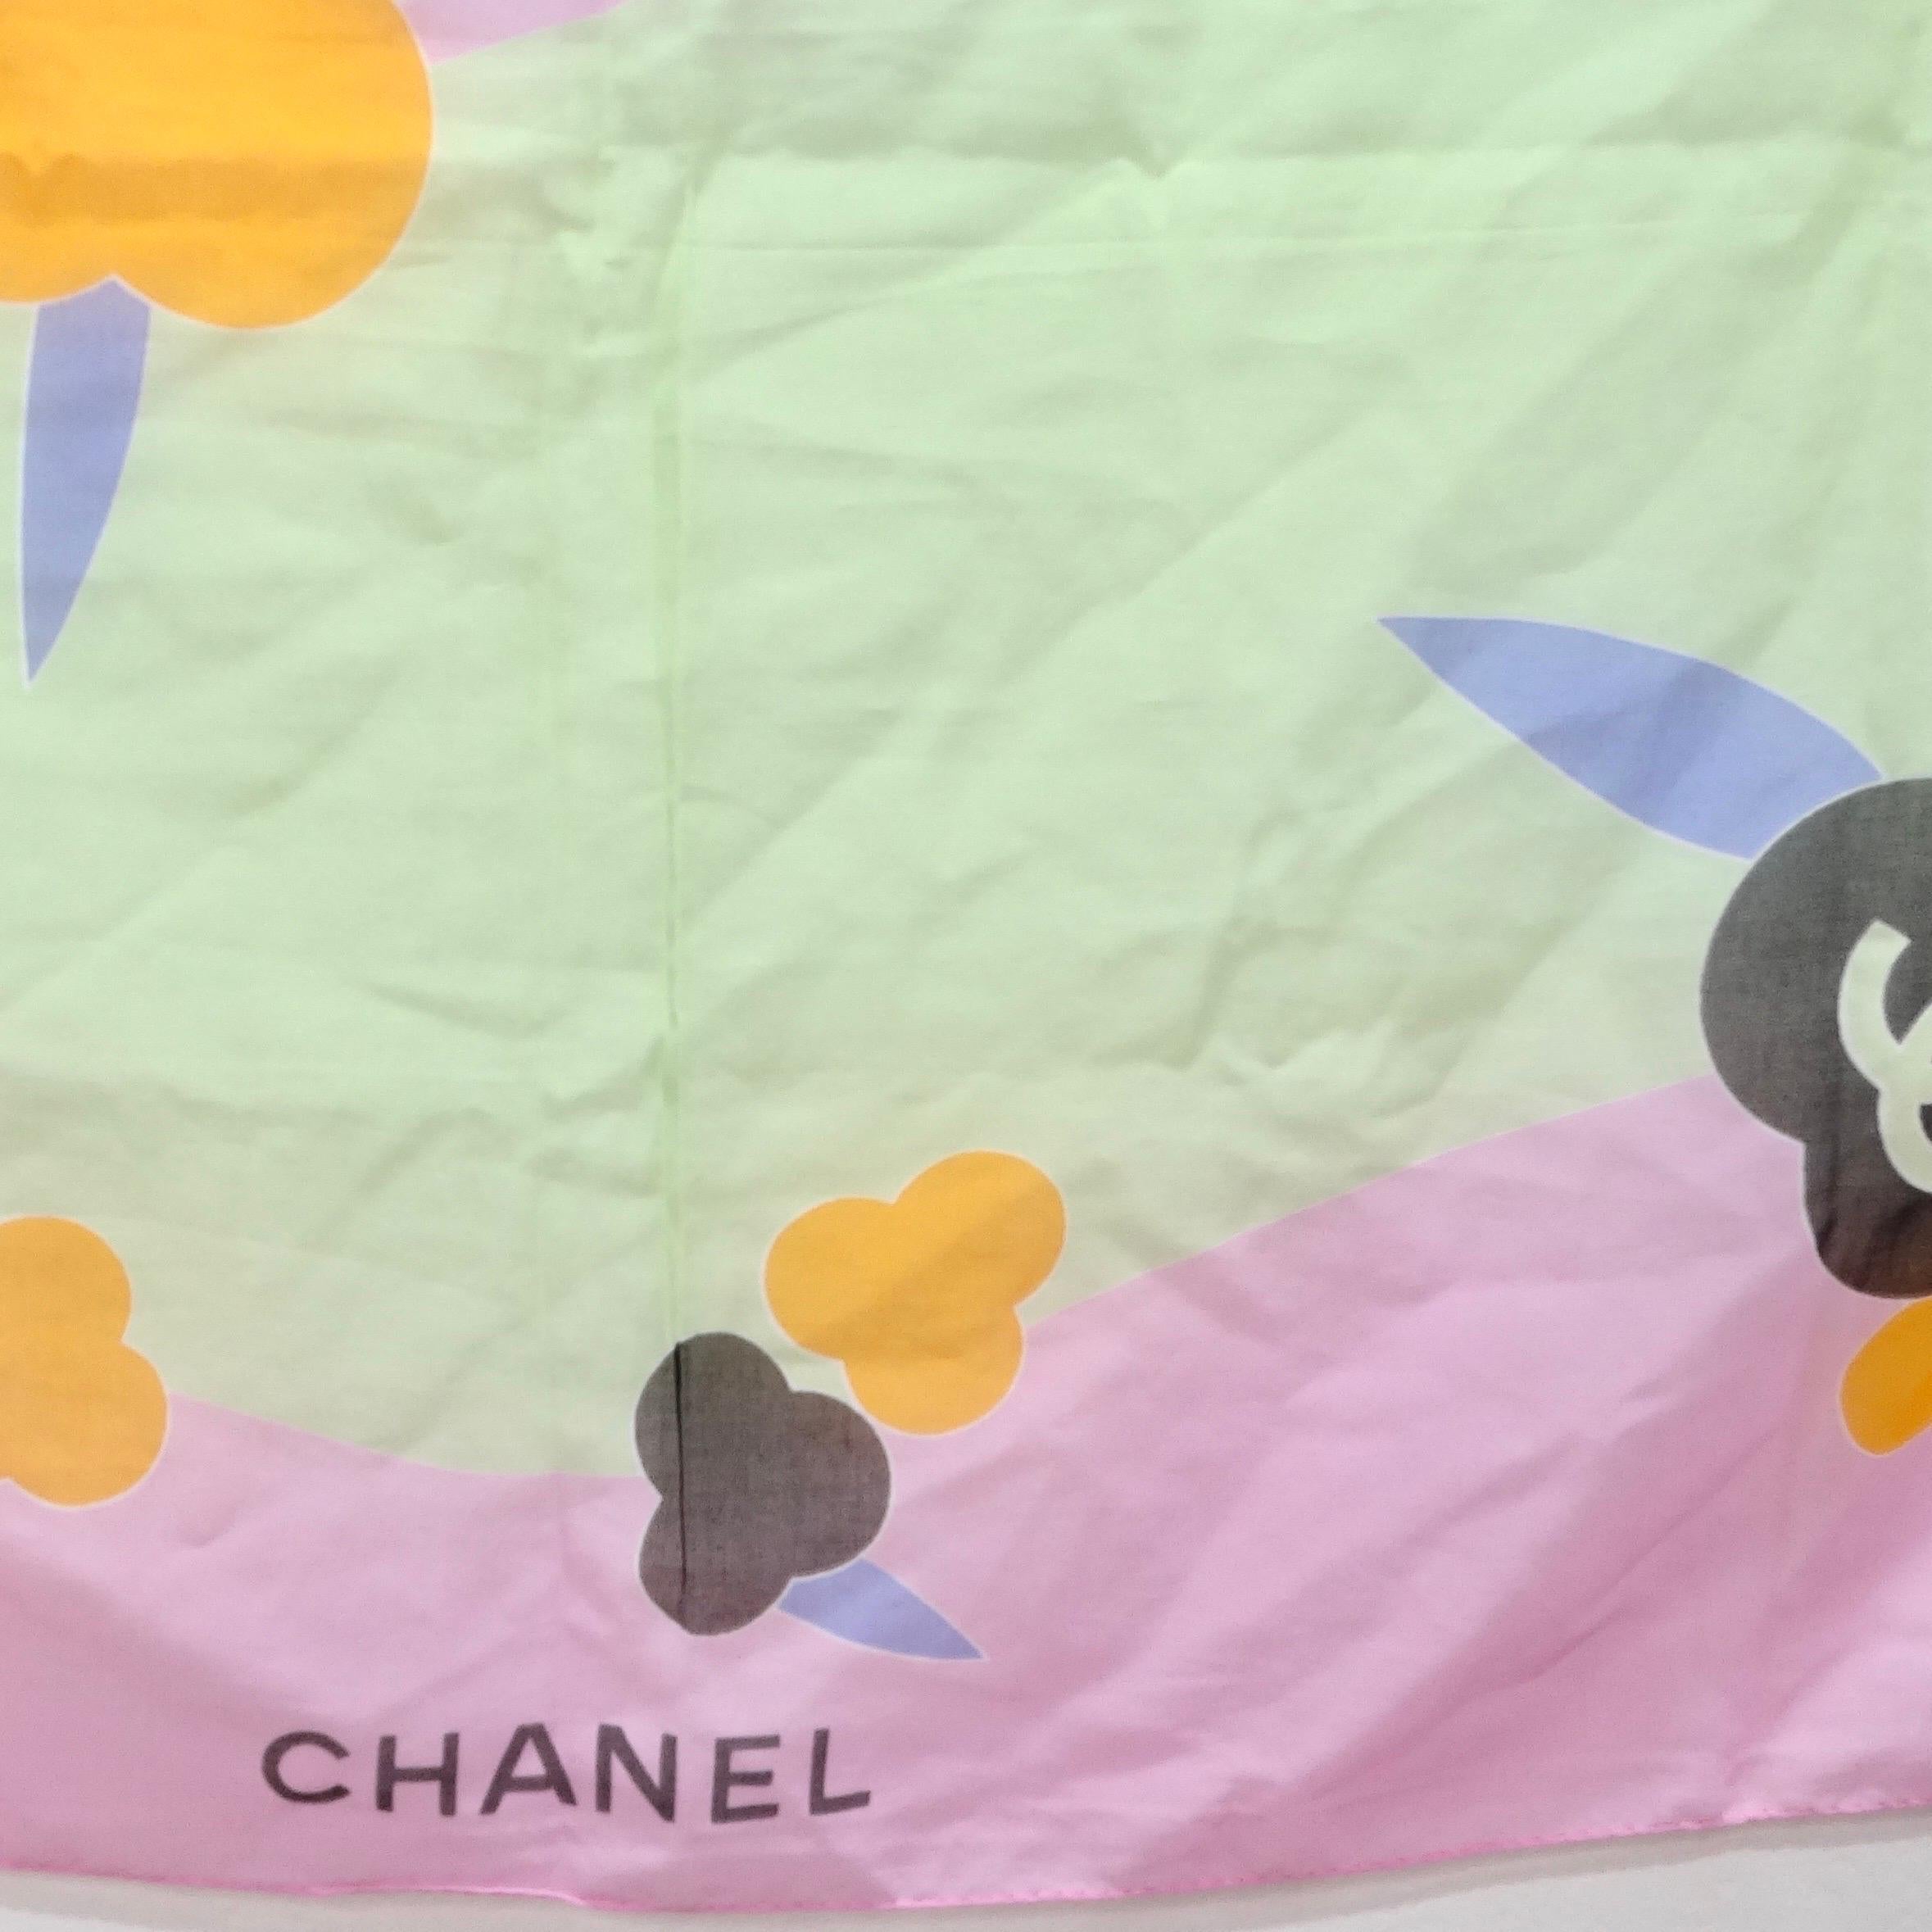 Indulge in the epitome of chic sophistication with this Chanel pink scarf floral scarf, a timeless accessory that exudes elegance. This exquisite scarf features black Chanel logos and the signature interlocking 'C' motif, beautifully complemented by